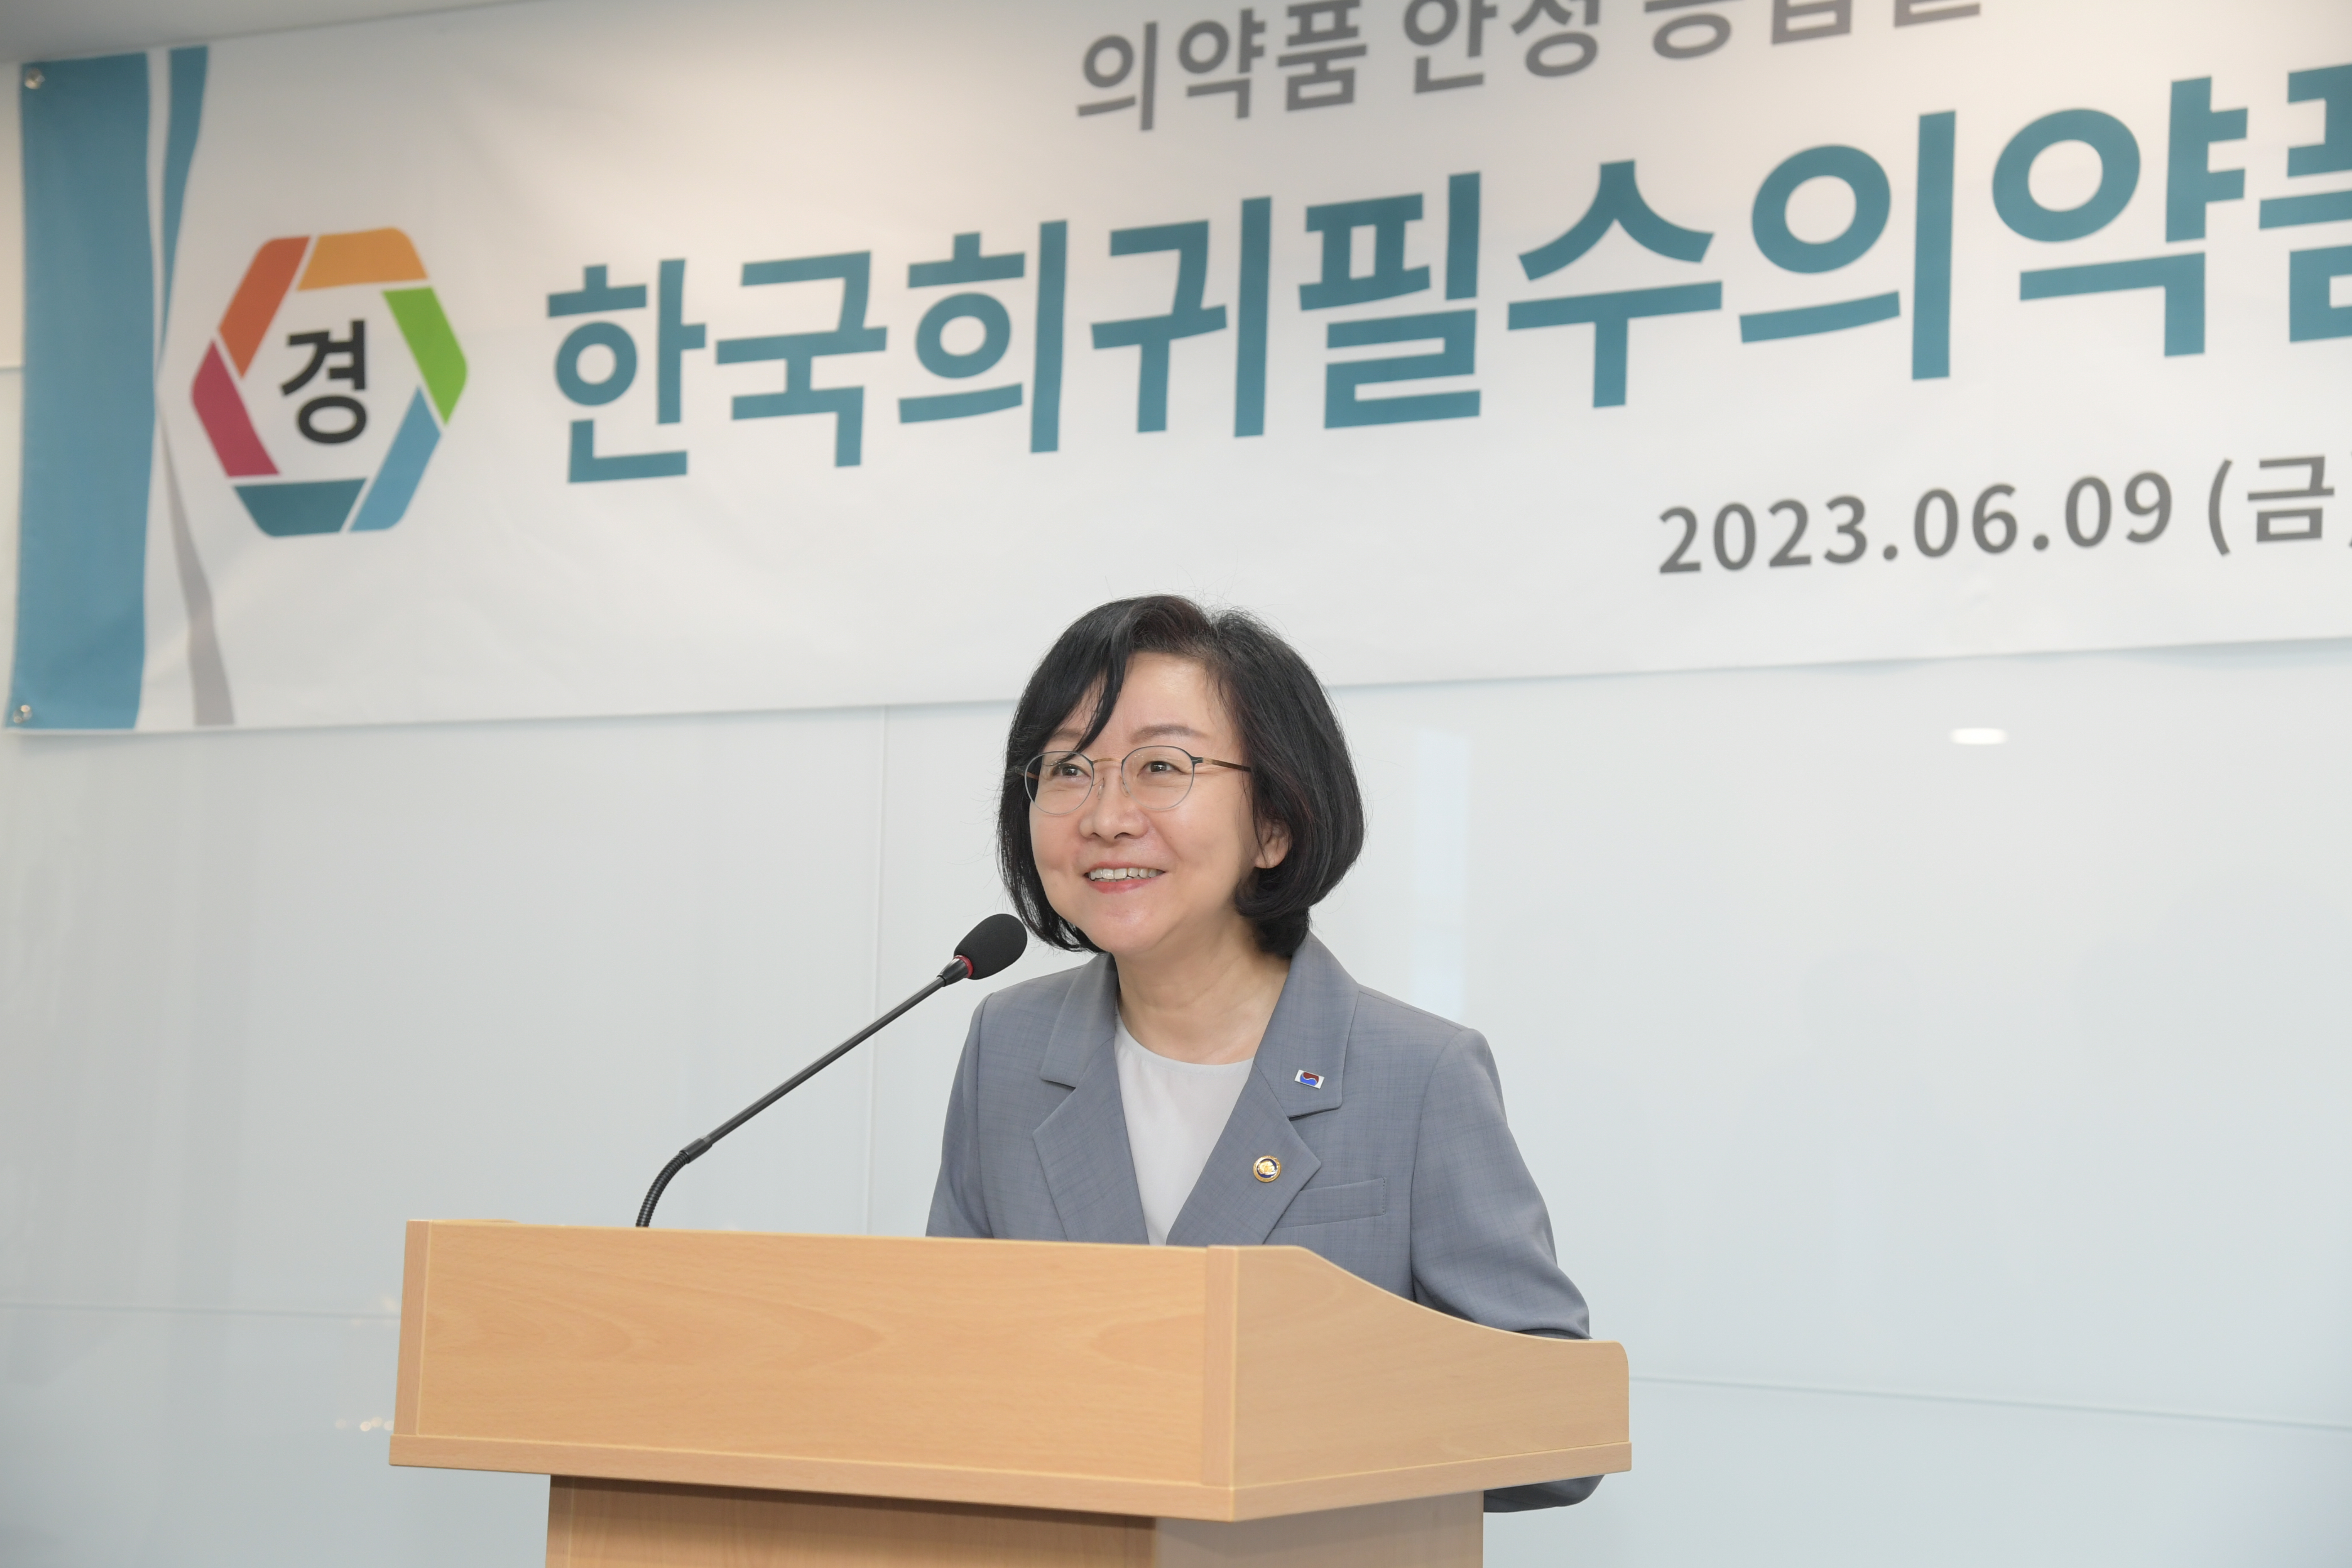 Photo News1 - [June 9, 2023] Minister Attends Opening Ceremony of Korea Orphan & Essential Drug Center